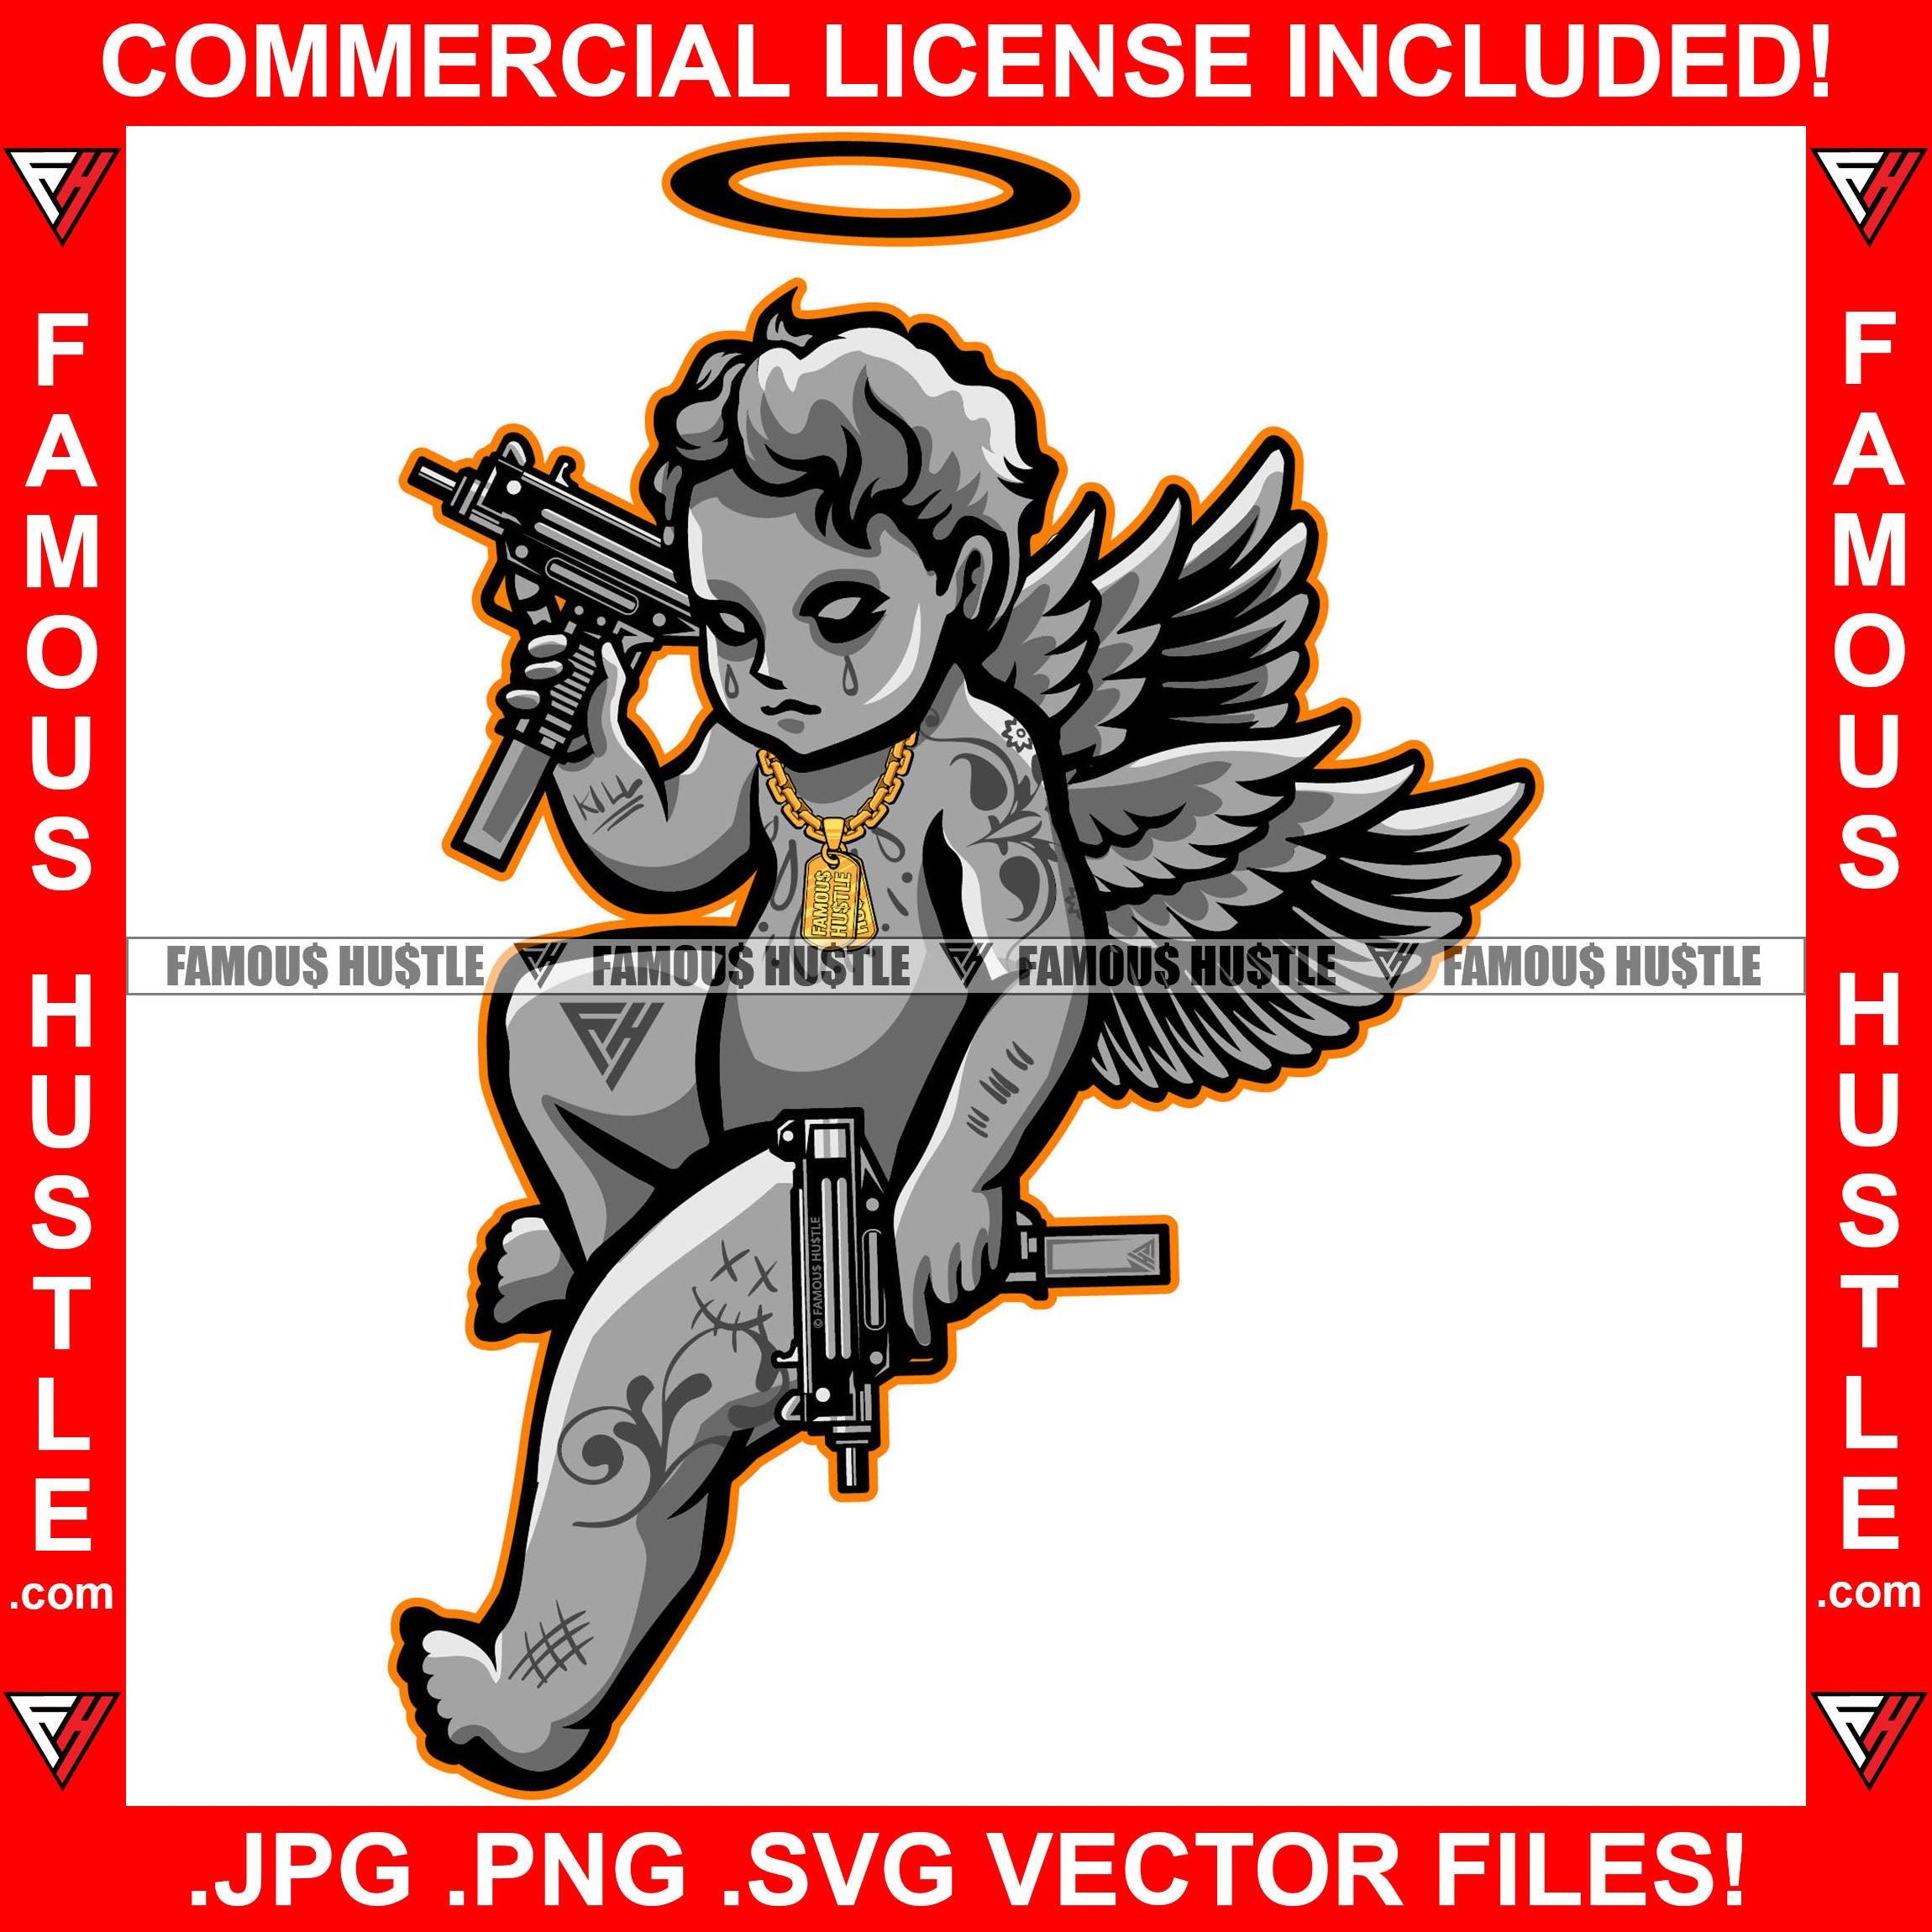 Angel Gun Snake Can Be Used Stock Vector Royalty Free 1771169552   Shutterstock